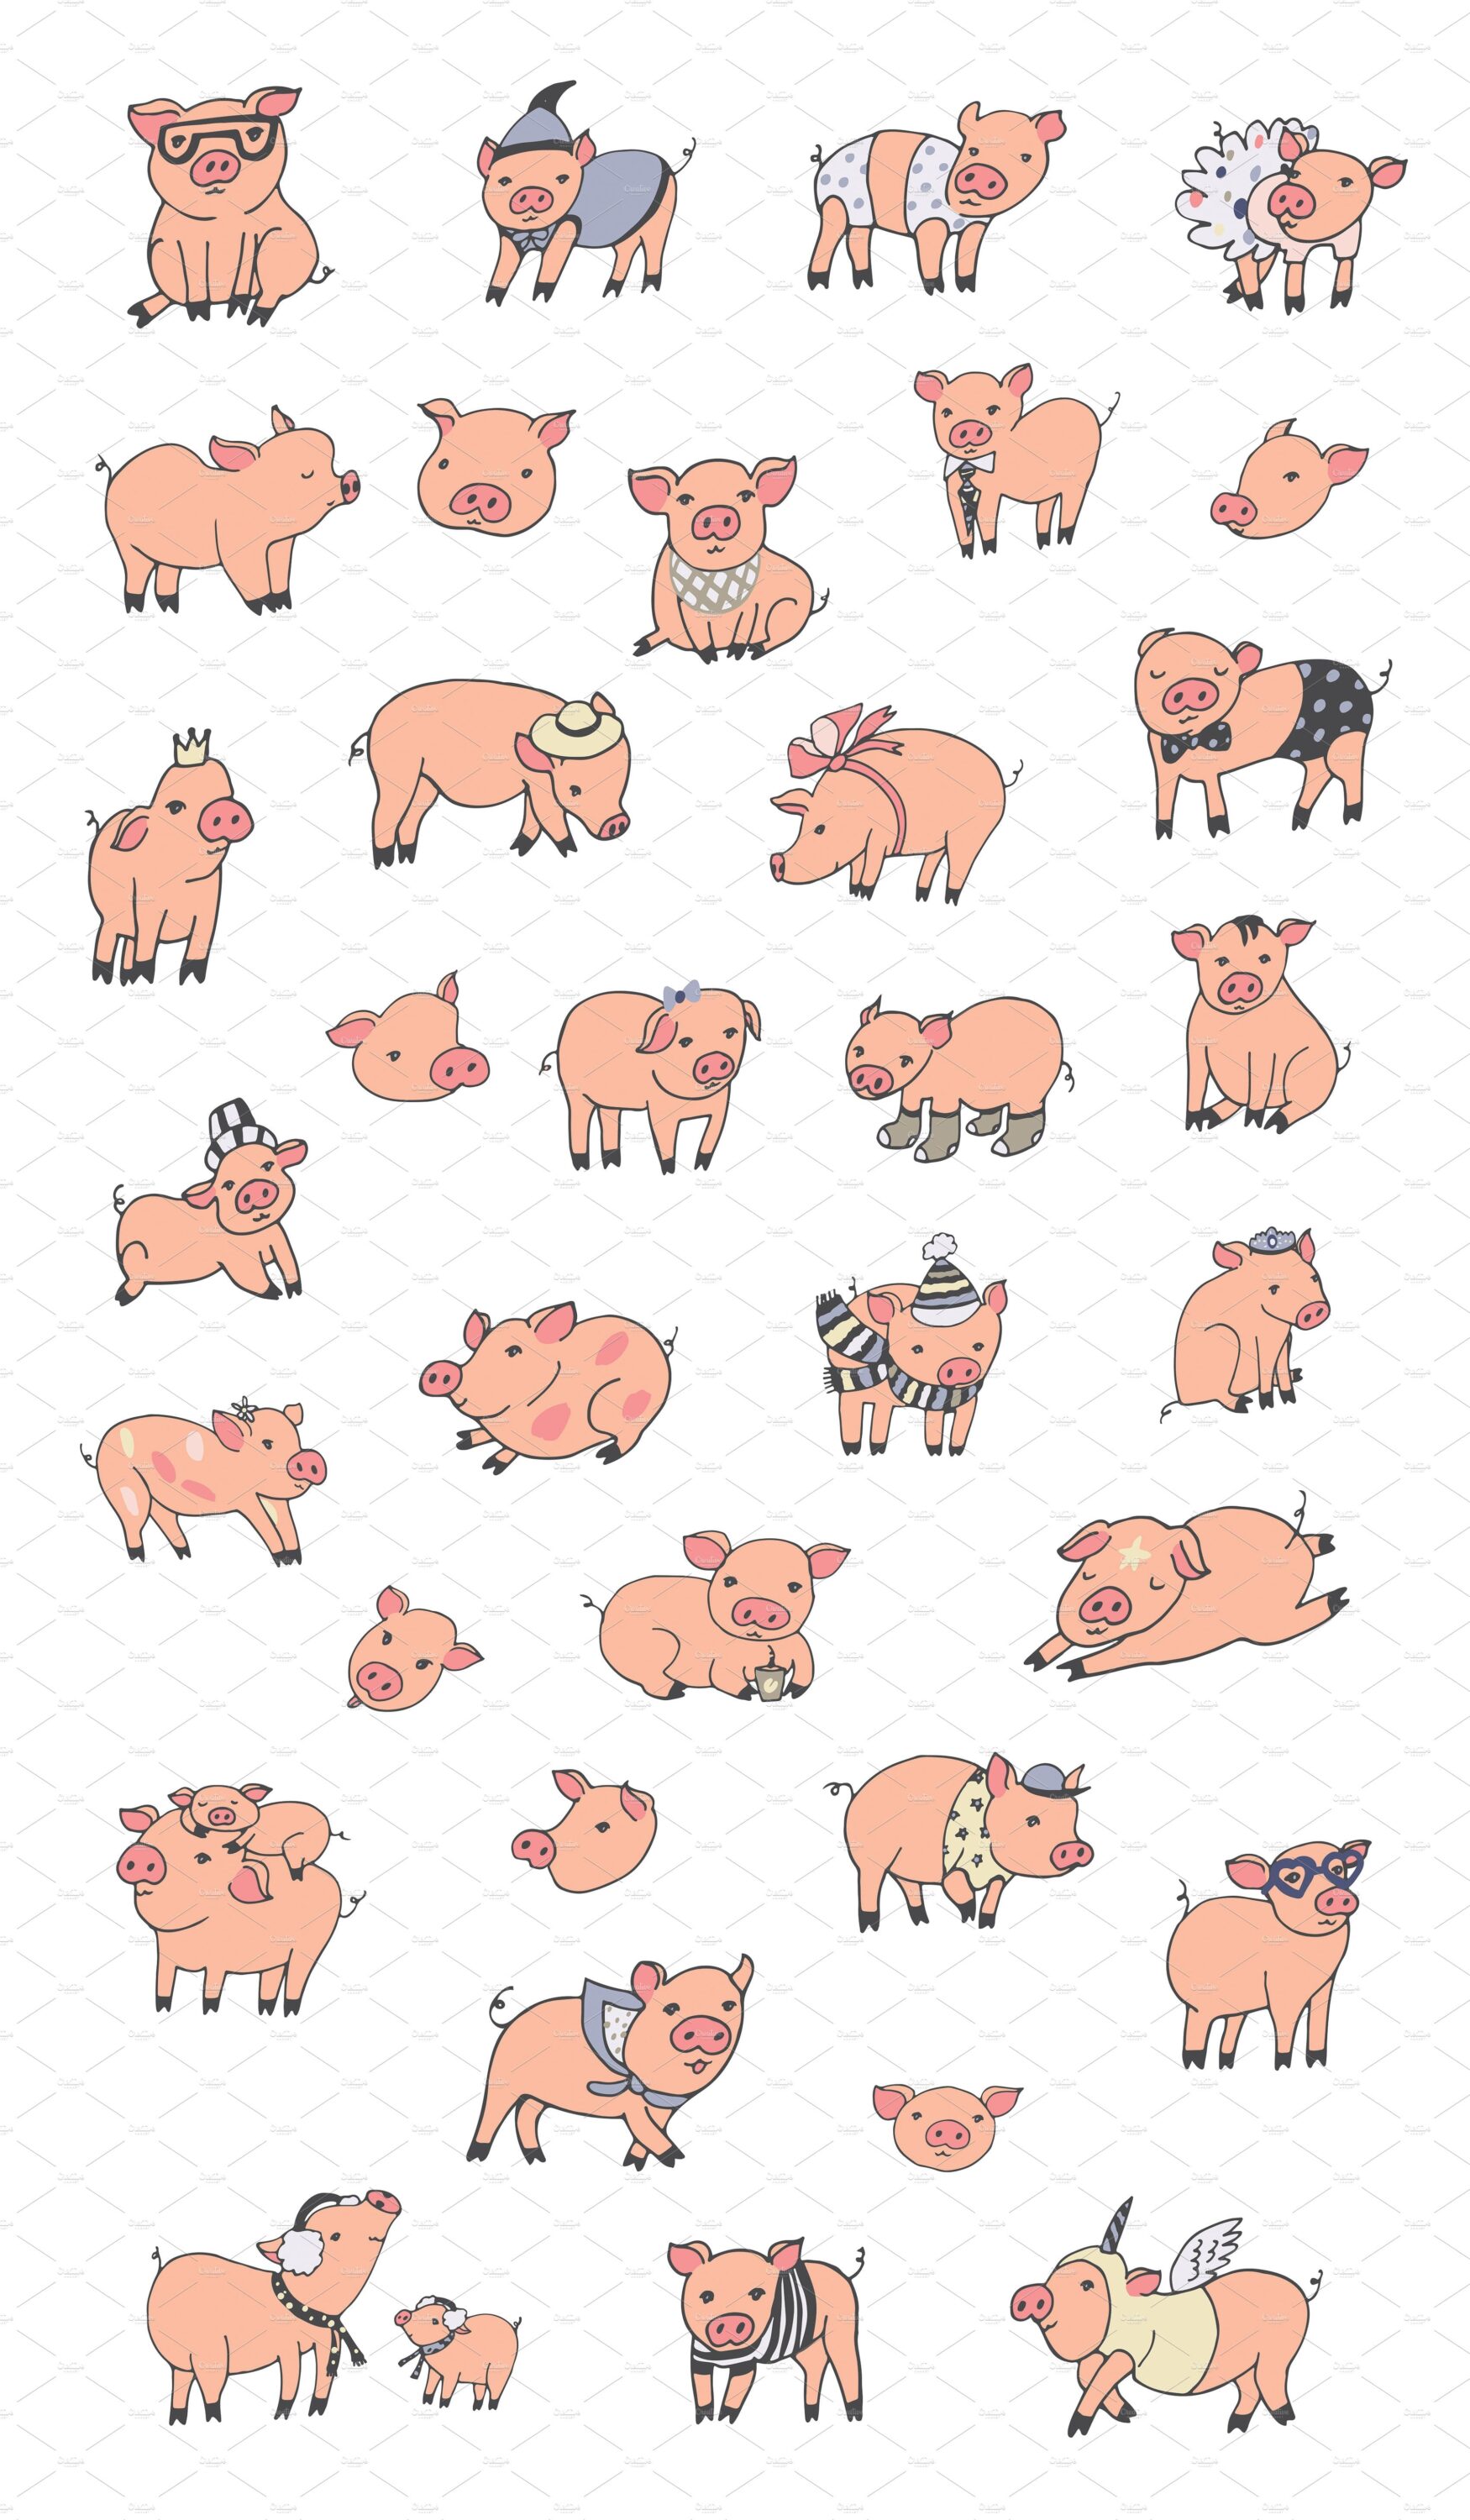 Funny Pigs.